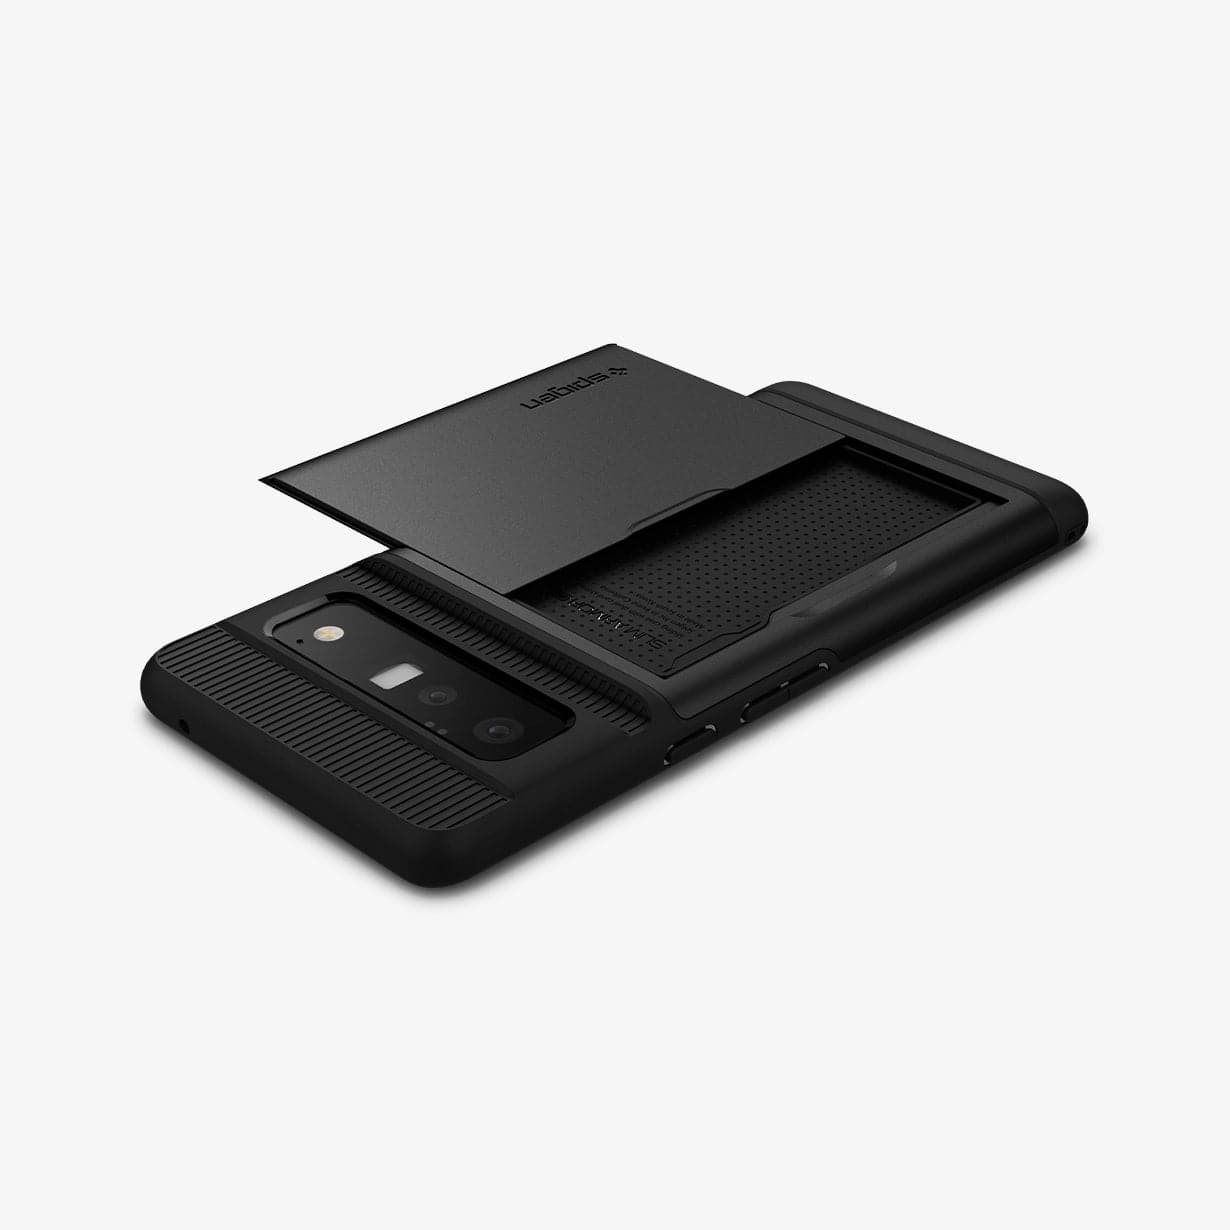 ACS03459 - Pixel 6 Pro Case Slim Armor CS in black showing the top, side and back with card slot open and empty